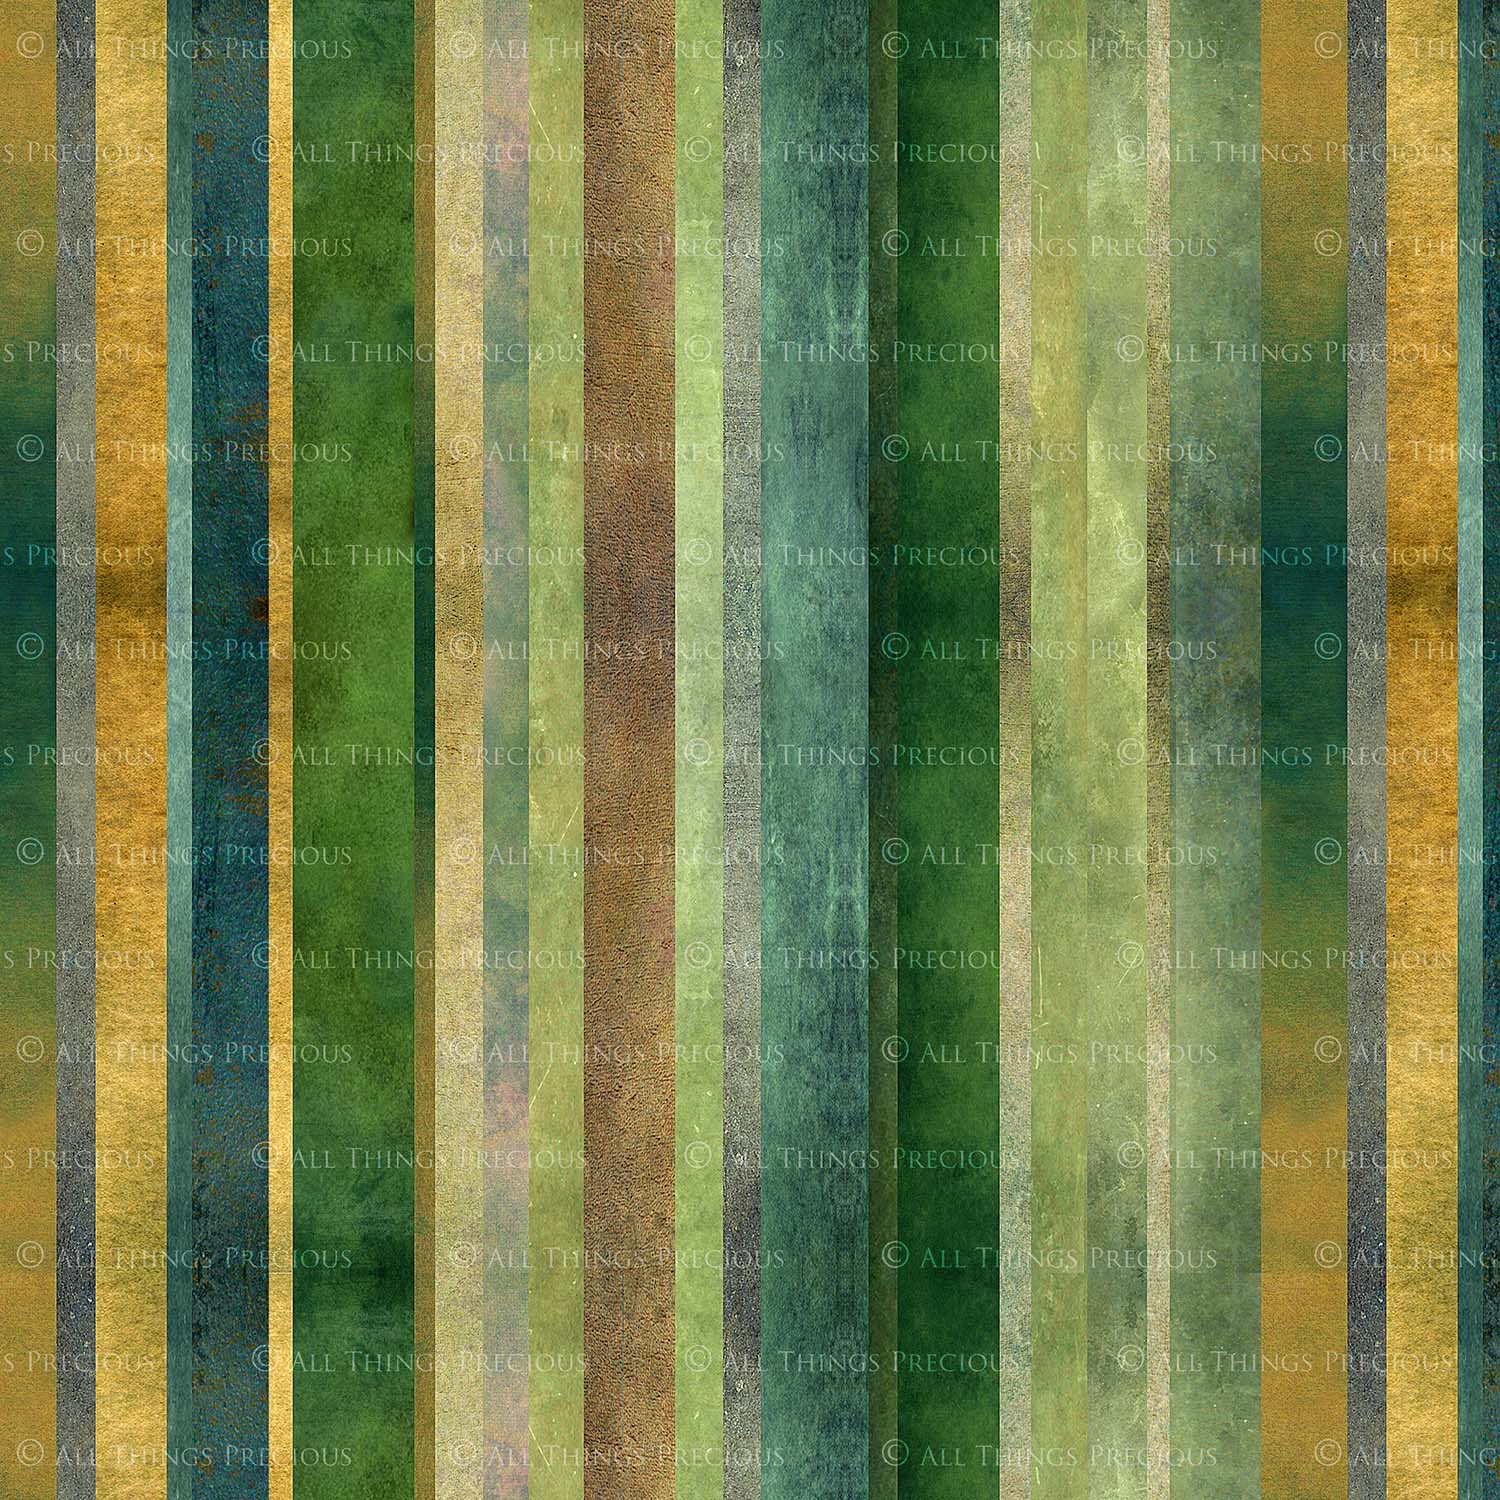 TEXTURED PATTERN - Gold & Green - Digital Papers